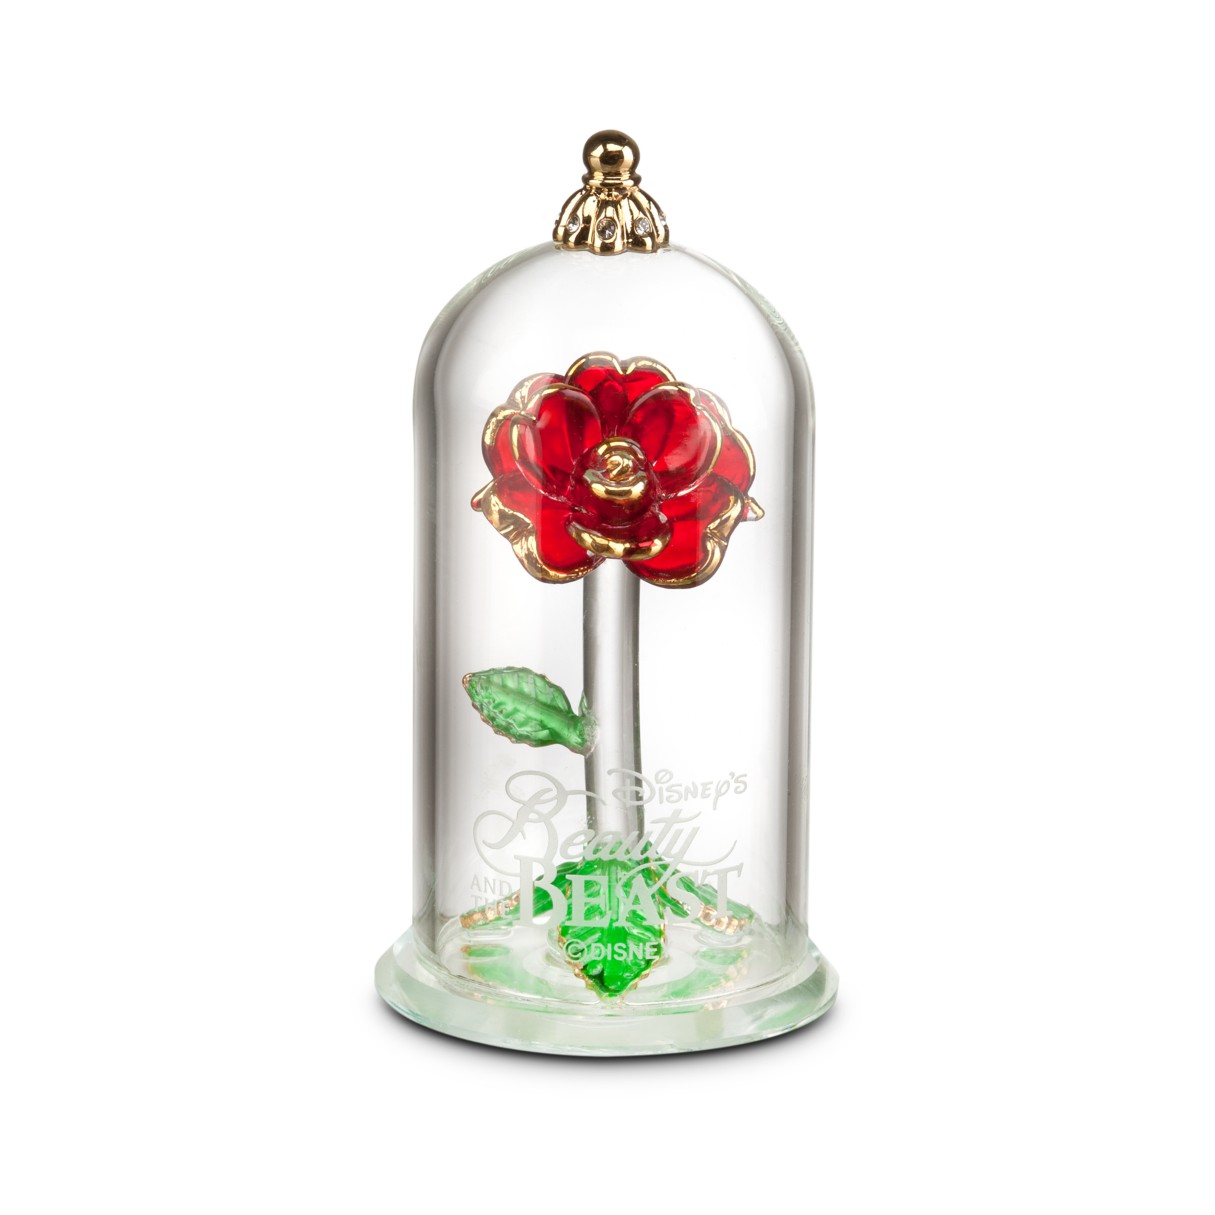 Beauty and the Beast Enchanted Rose Glass Sculpture by Arribas – Small